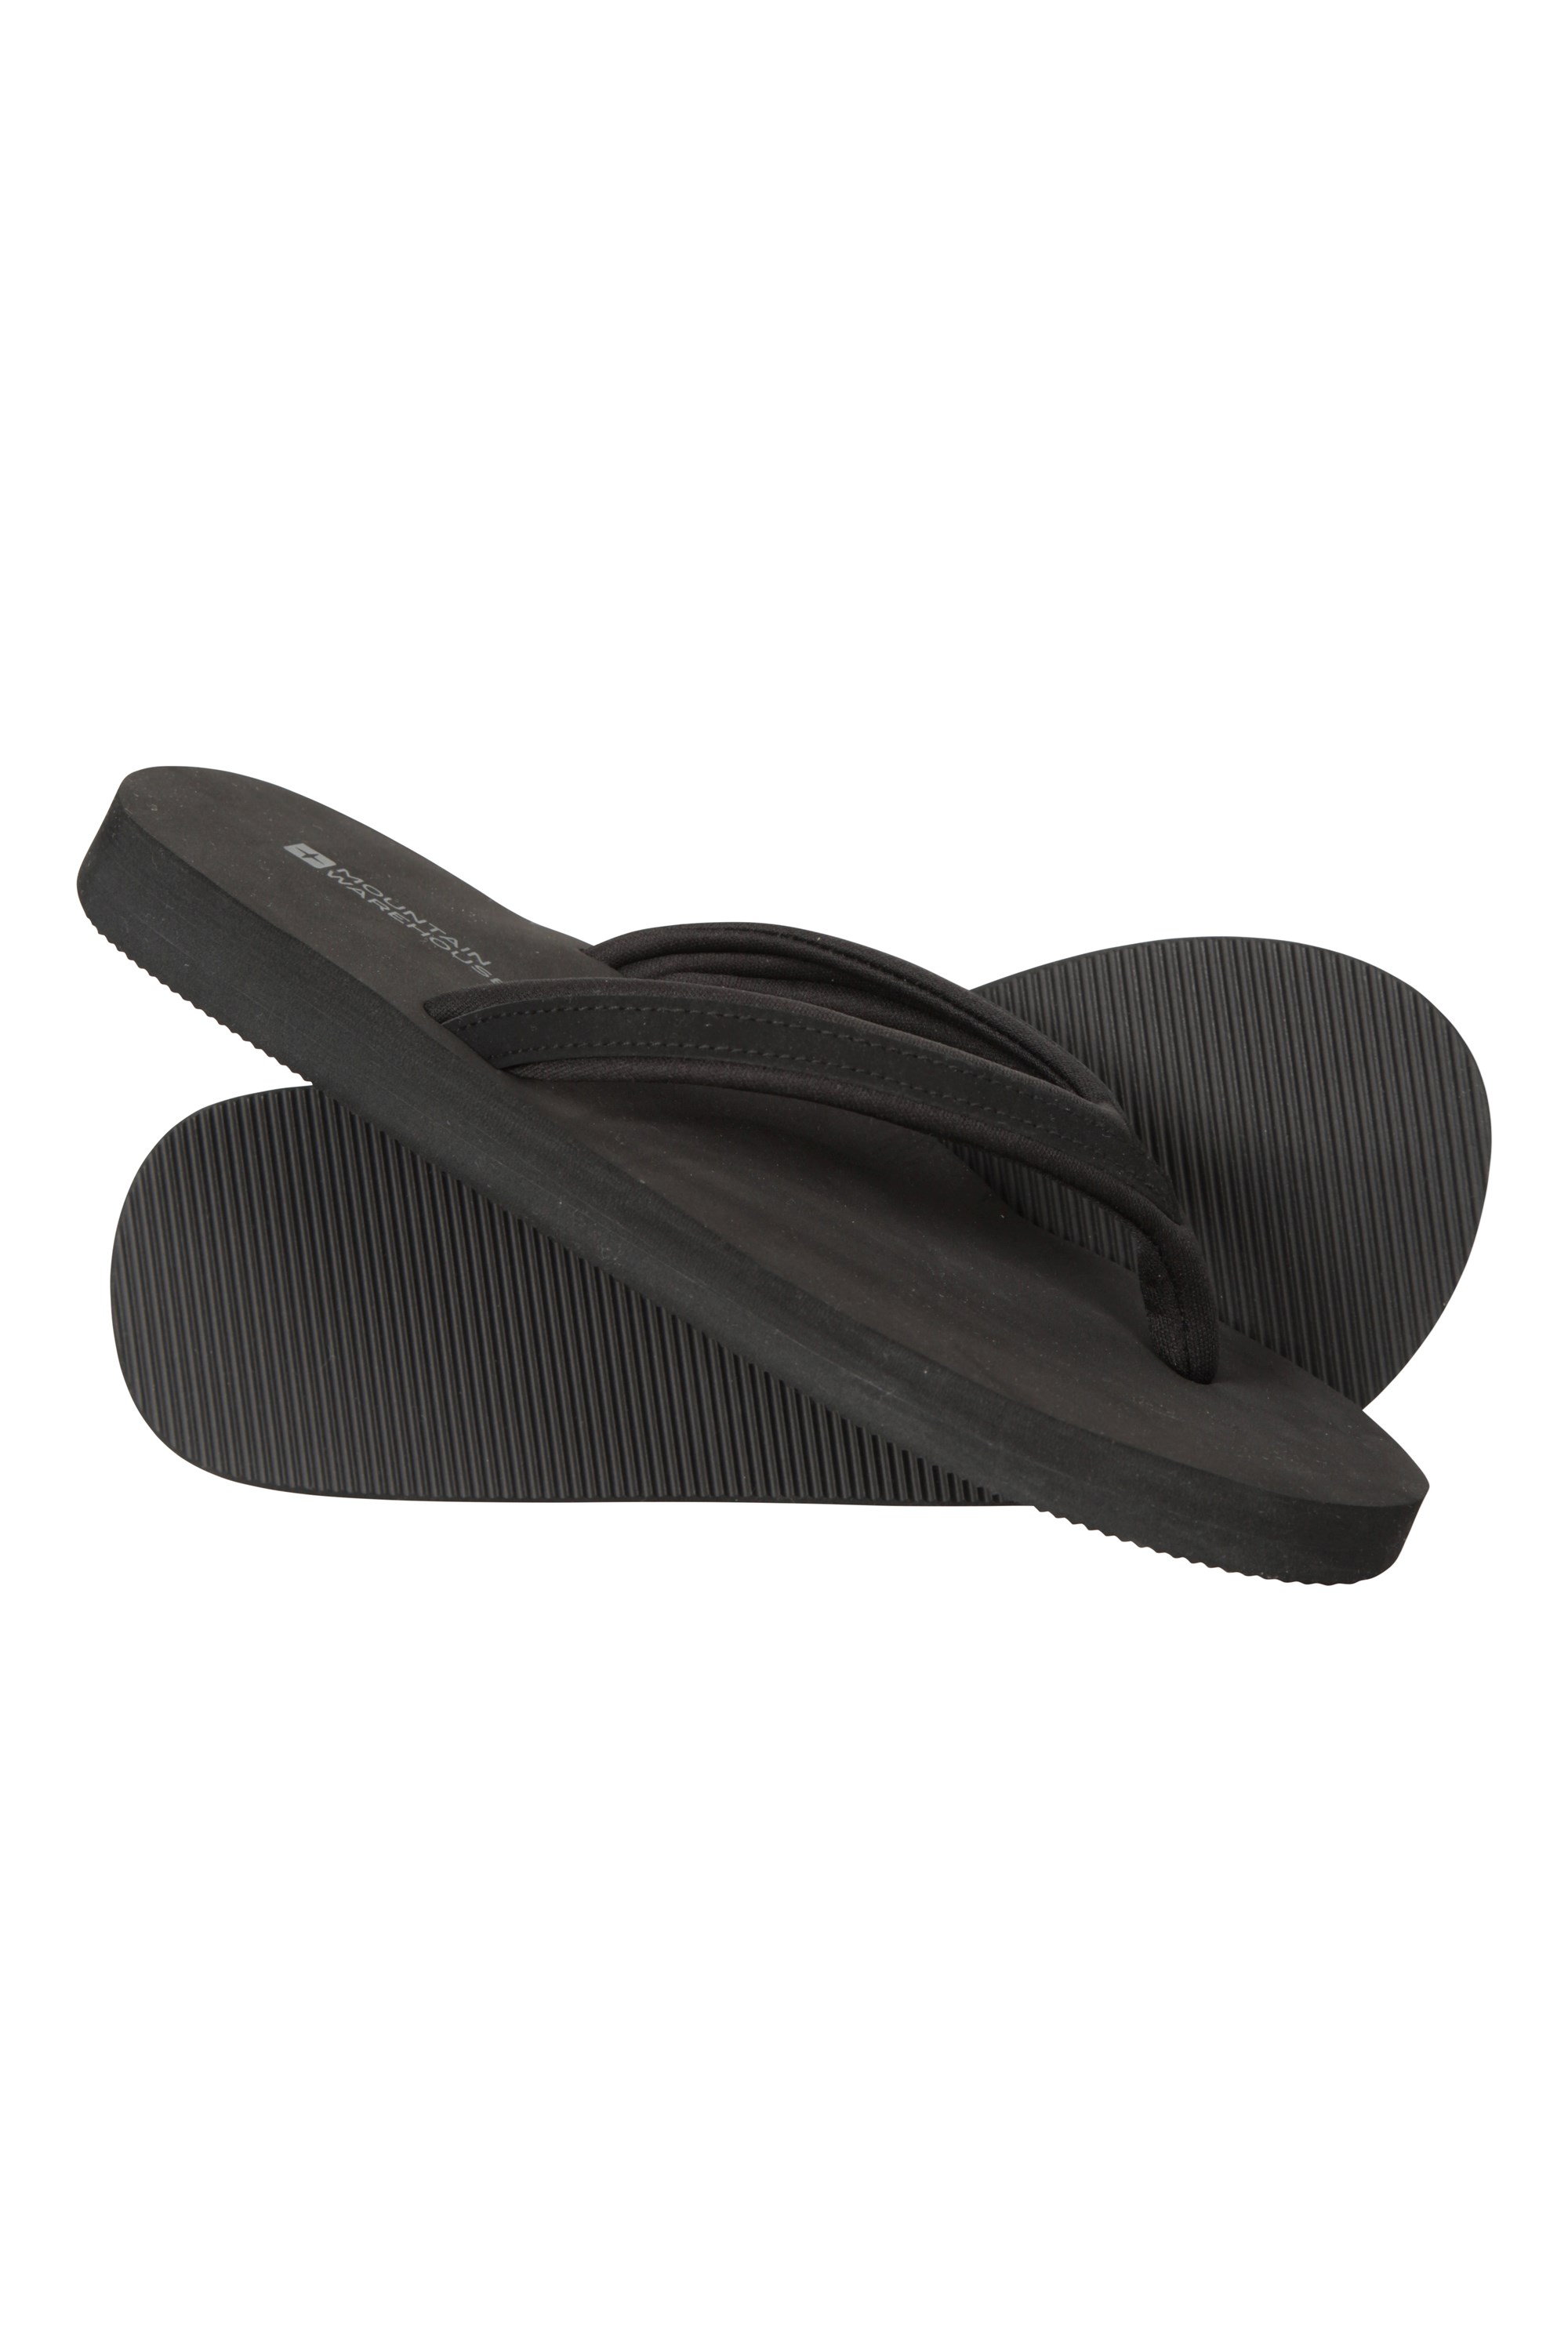 Vacation Womens Recycled Flip Flops